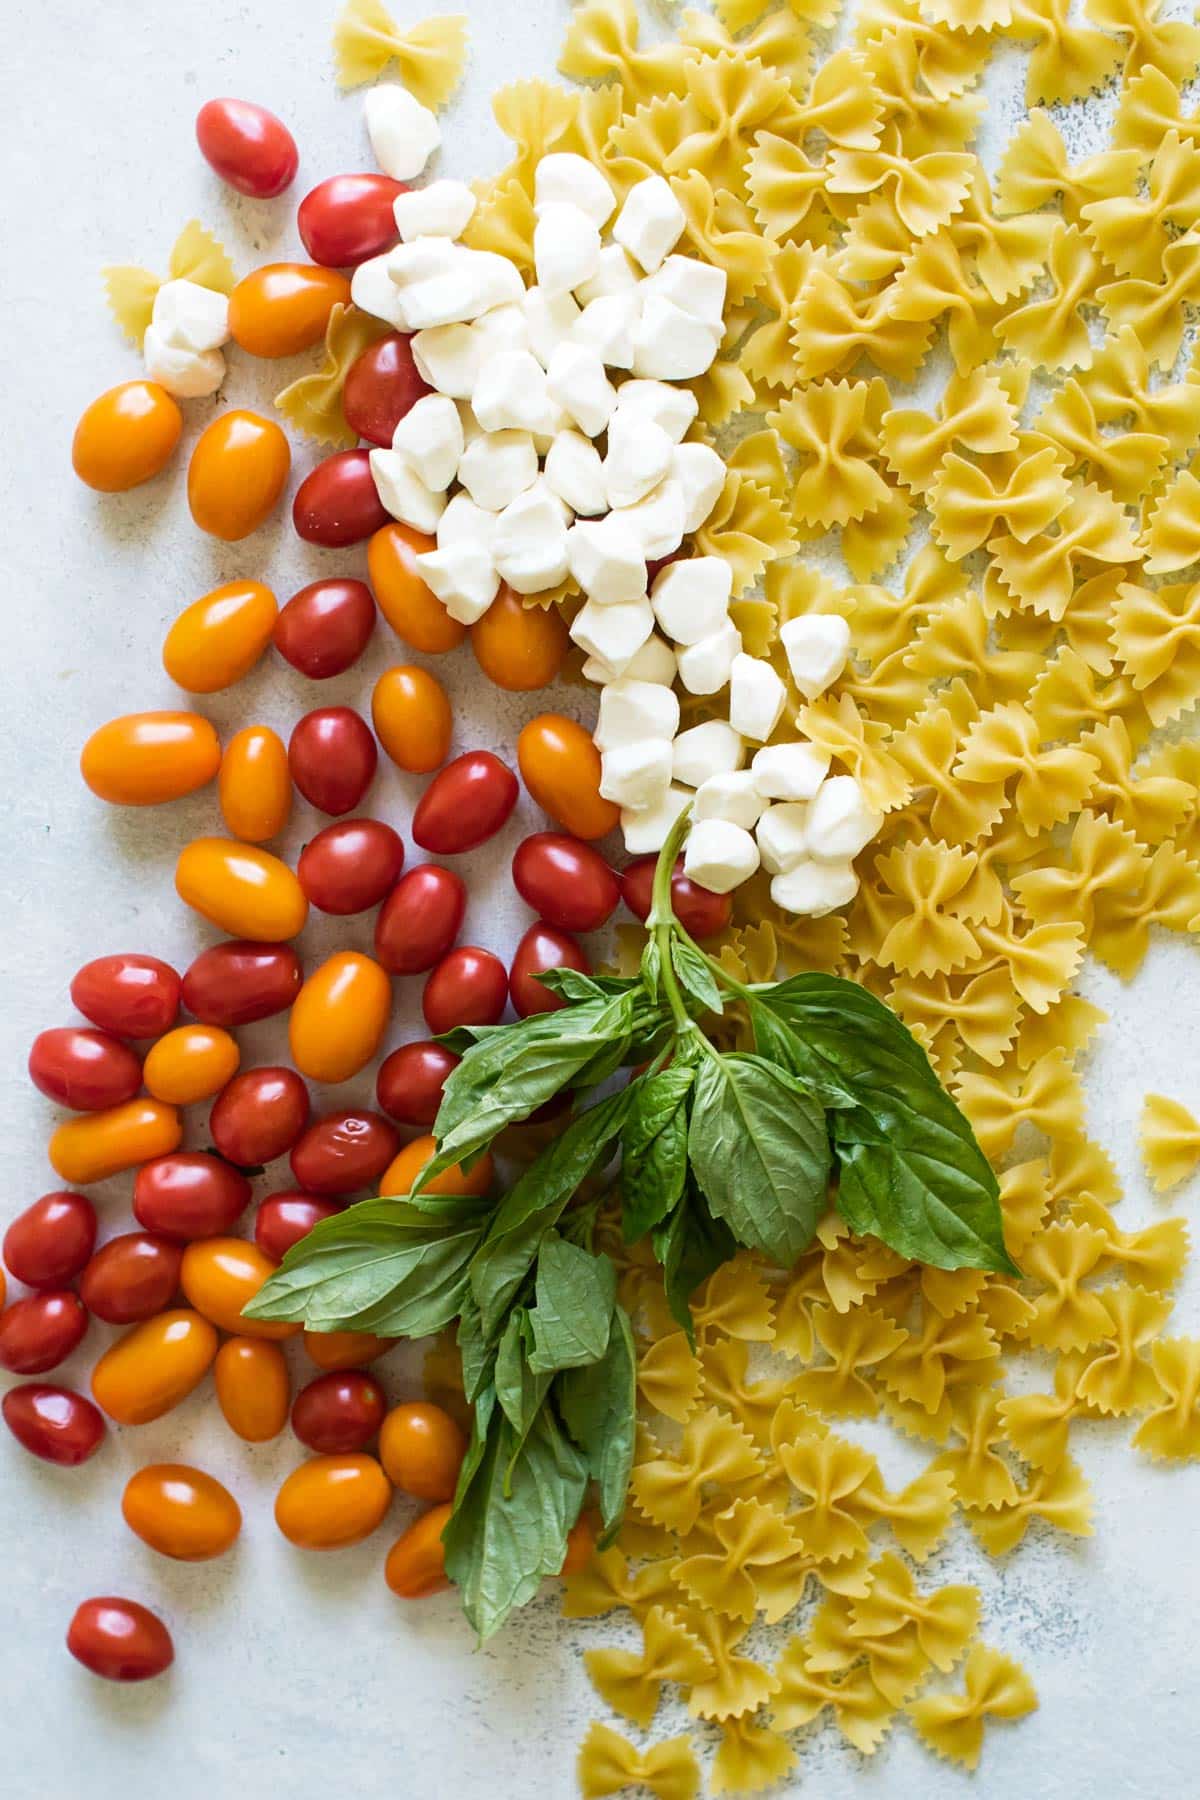 grape tomatoes, pasta, fresh basil leaves, and mozzarella balls spread out on a surface.